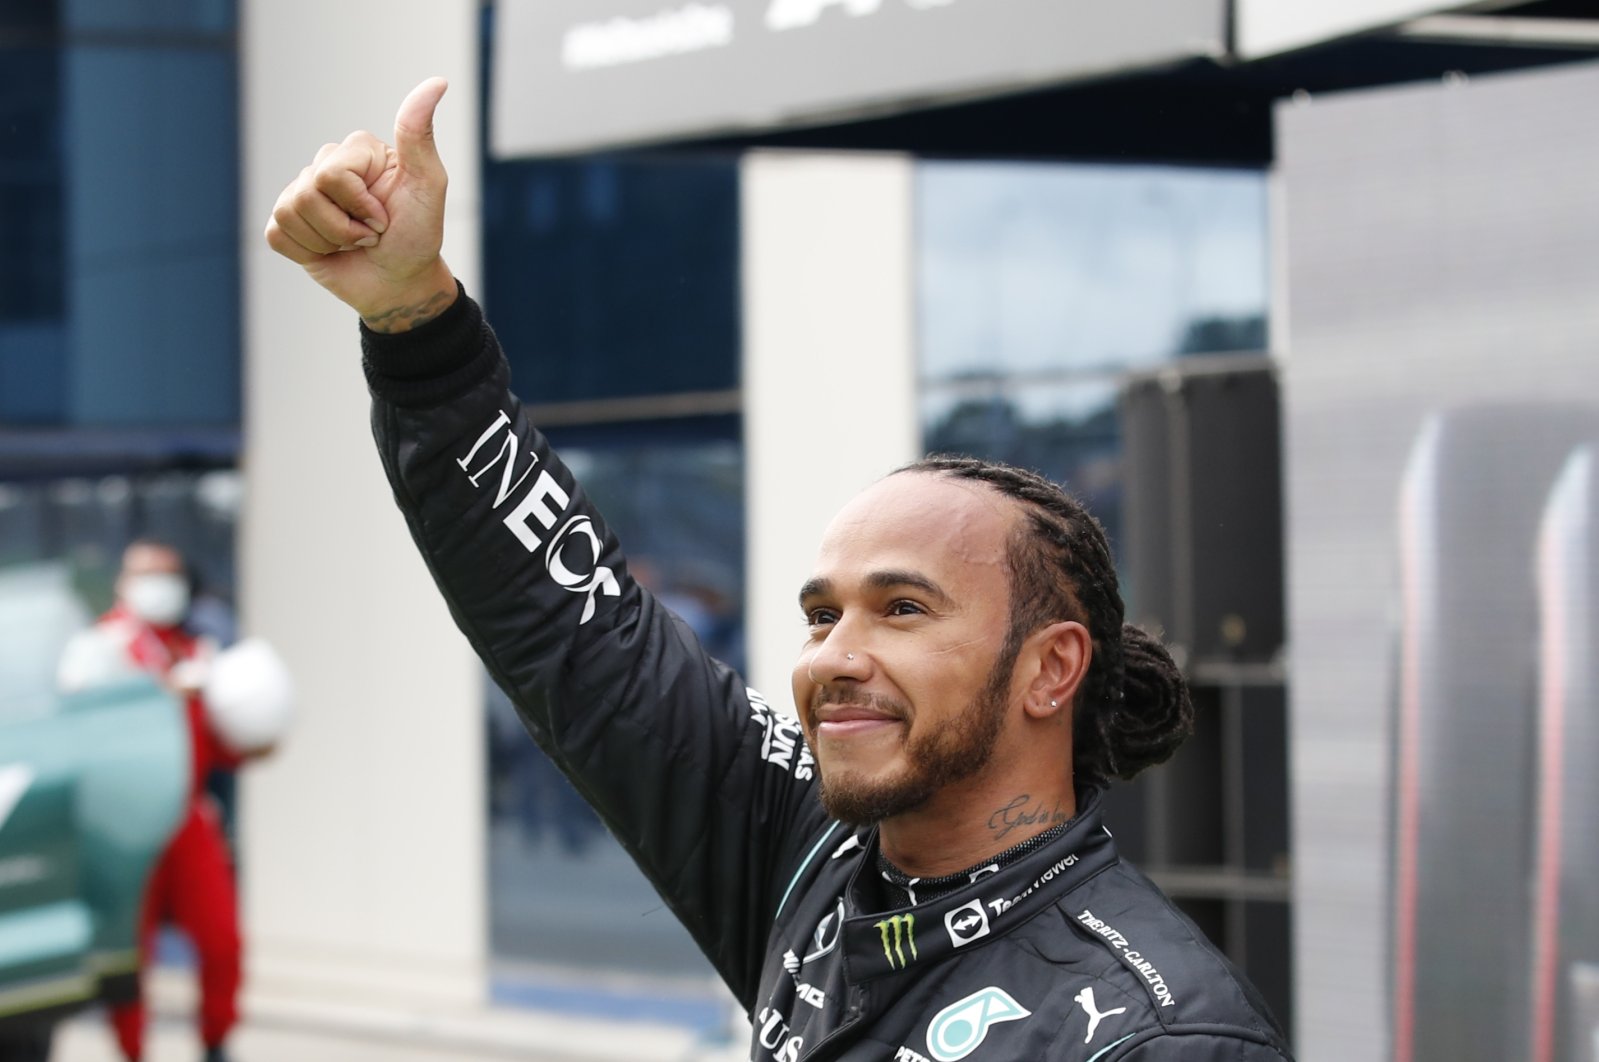 Mercedes driver Lewis Hamilton of Britain, reacts to the crowds after the end of qualifying for Sunday's Formula One Turkish Grand Prix at the Intercity Istanbul Park circuit in Istanbul, Turkey, Saturday, Oct. 9, 2021. (AP Photo)